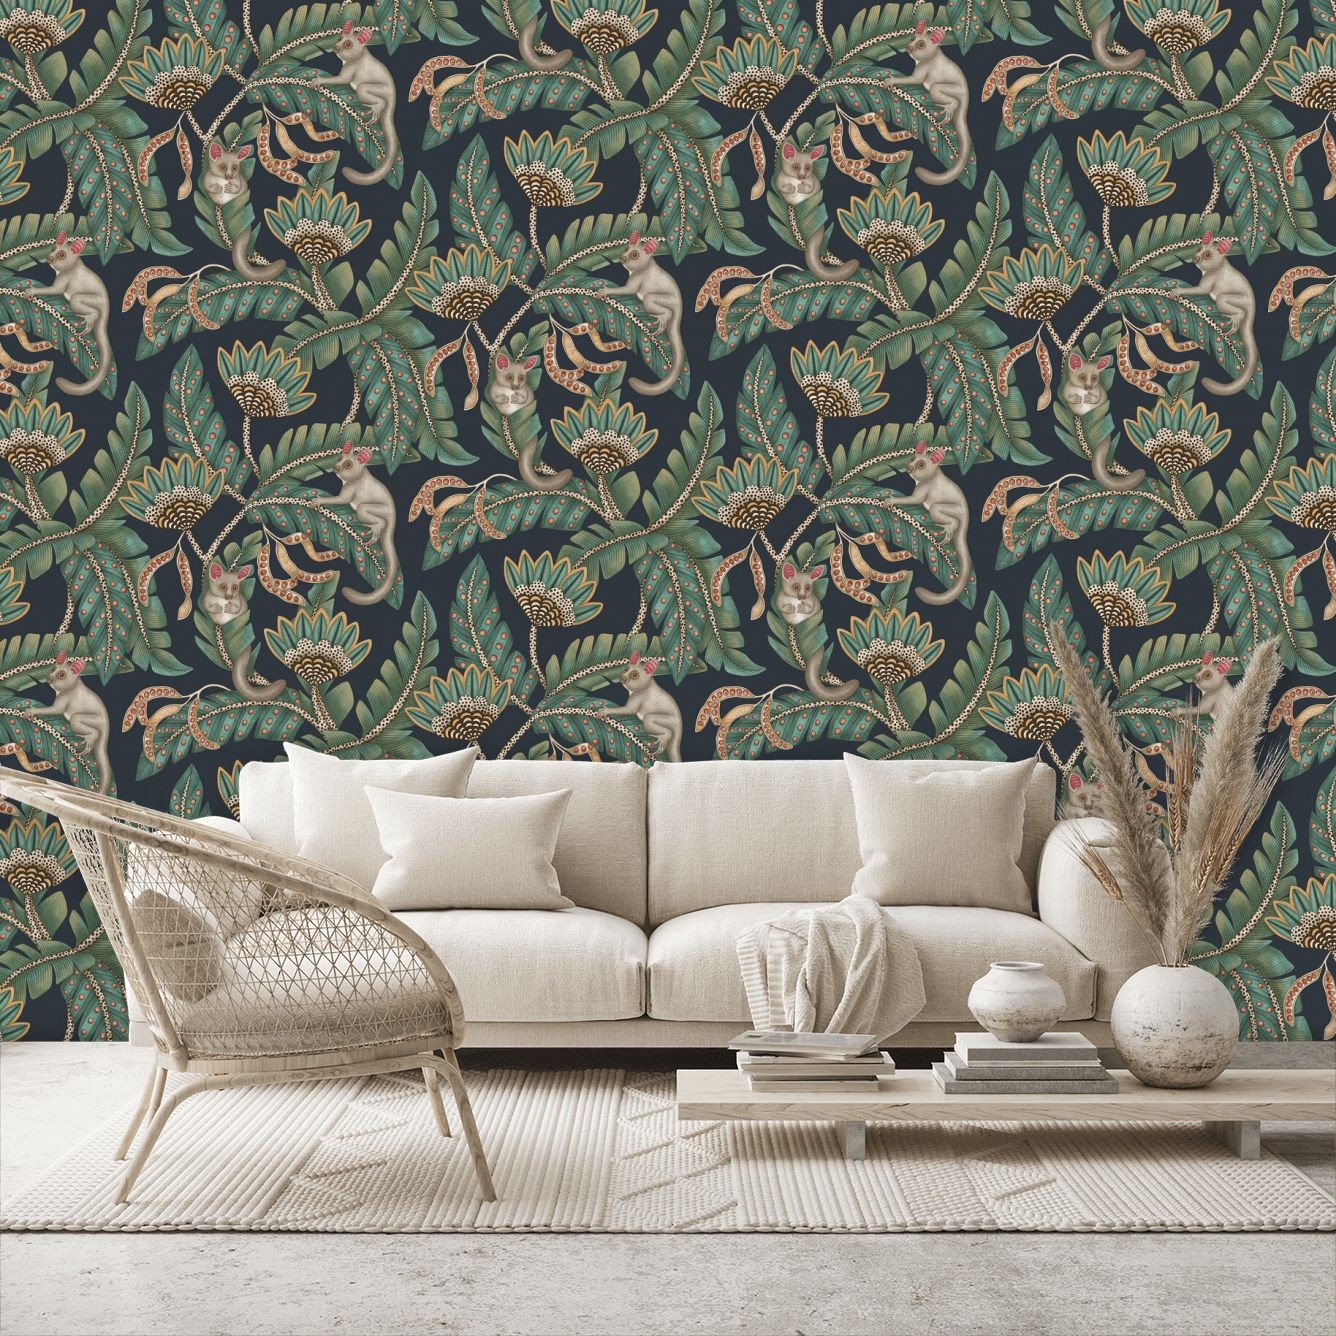 Bush Baby Wallpaper - Teal & Ochre on Ink - By Cole and Son - 119/7034